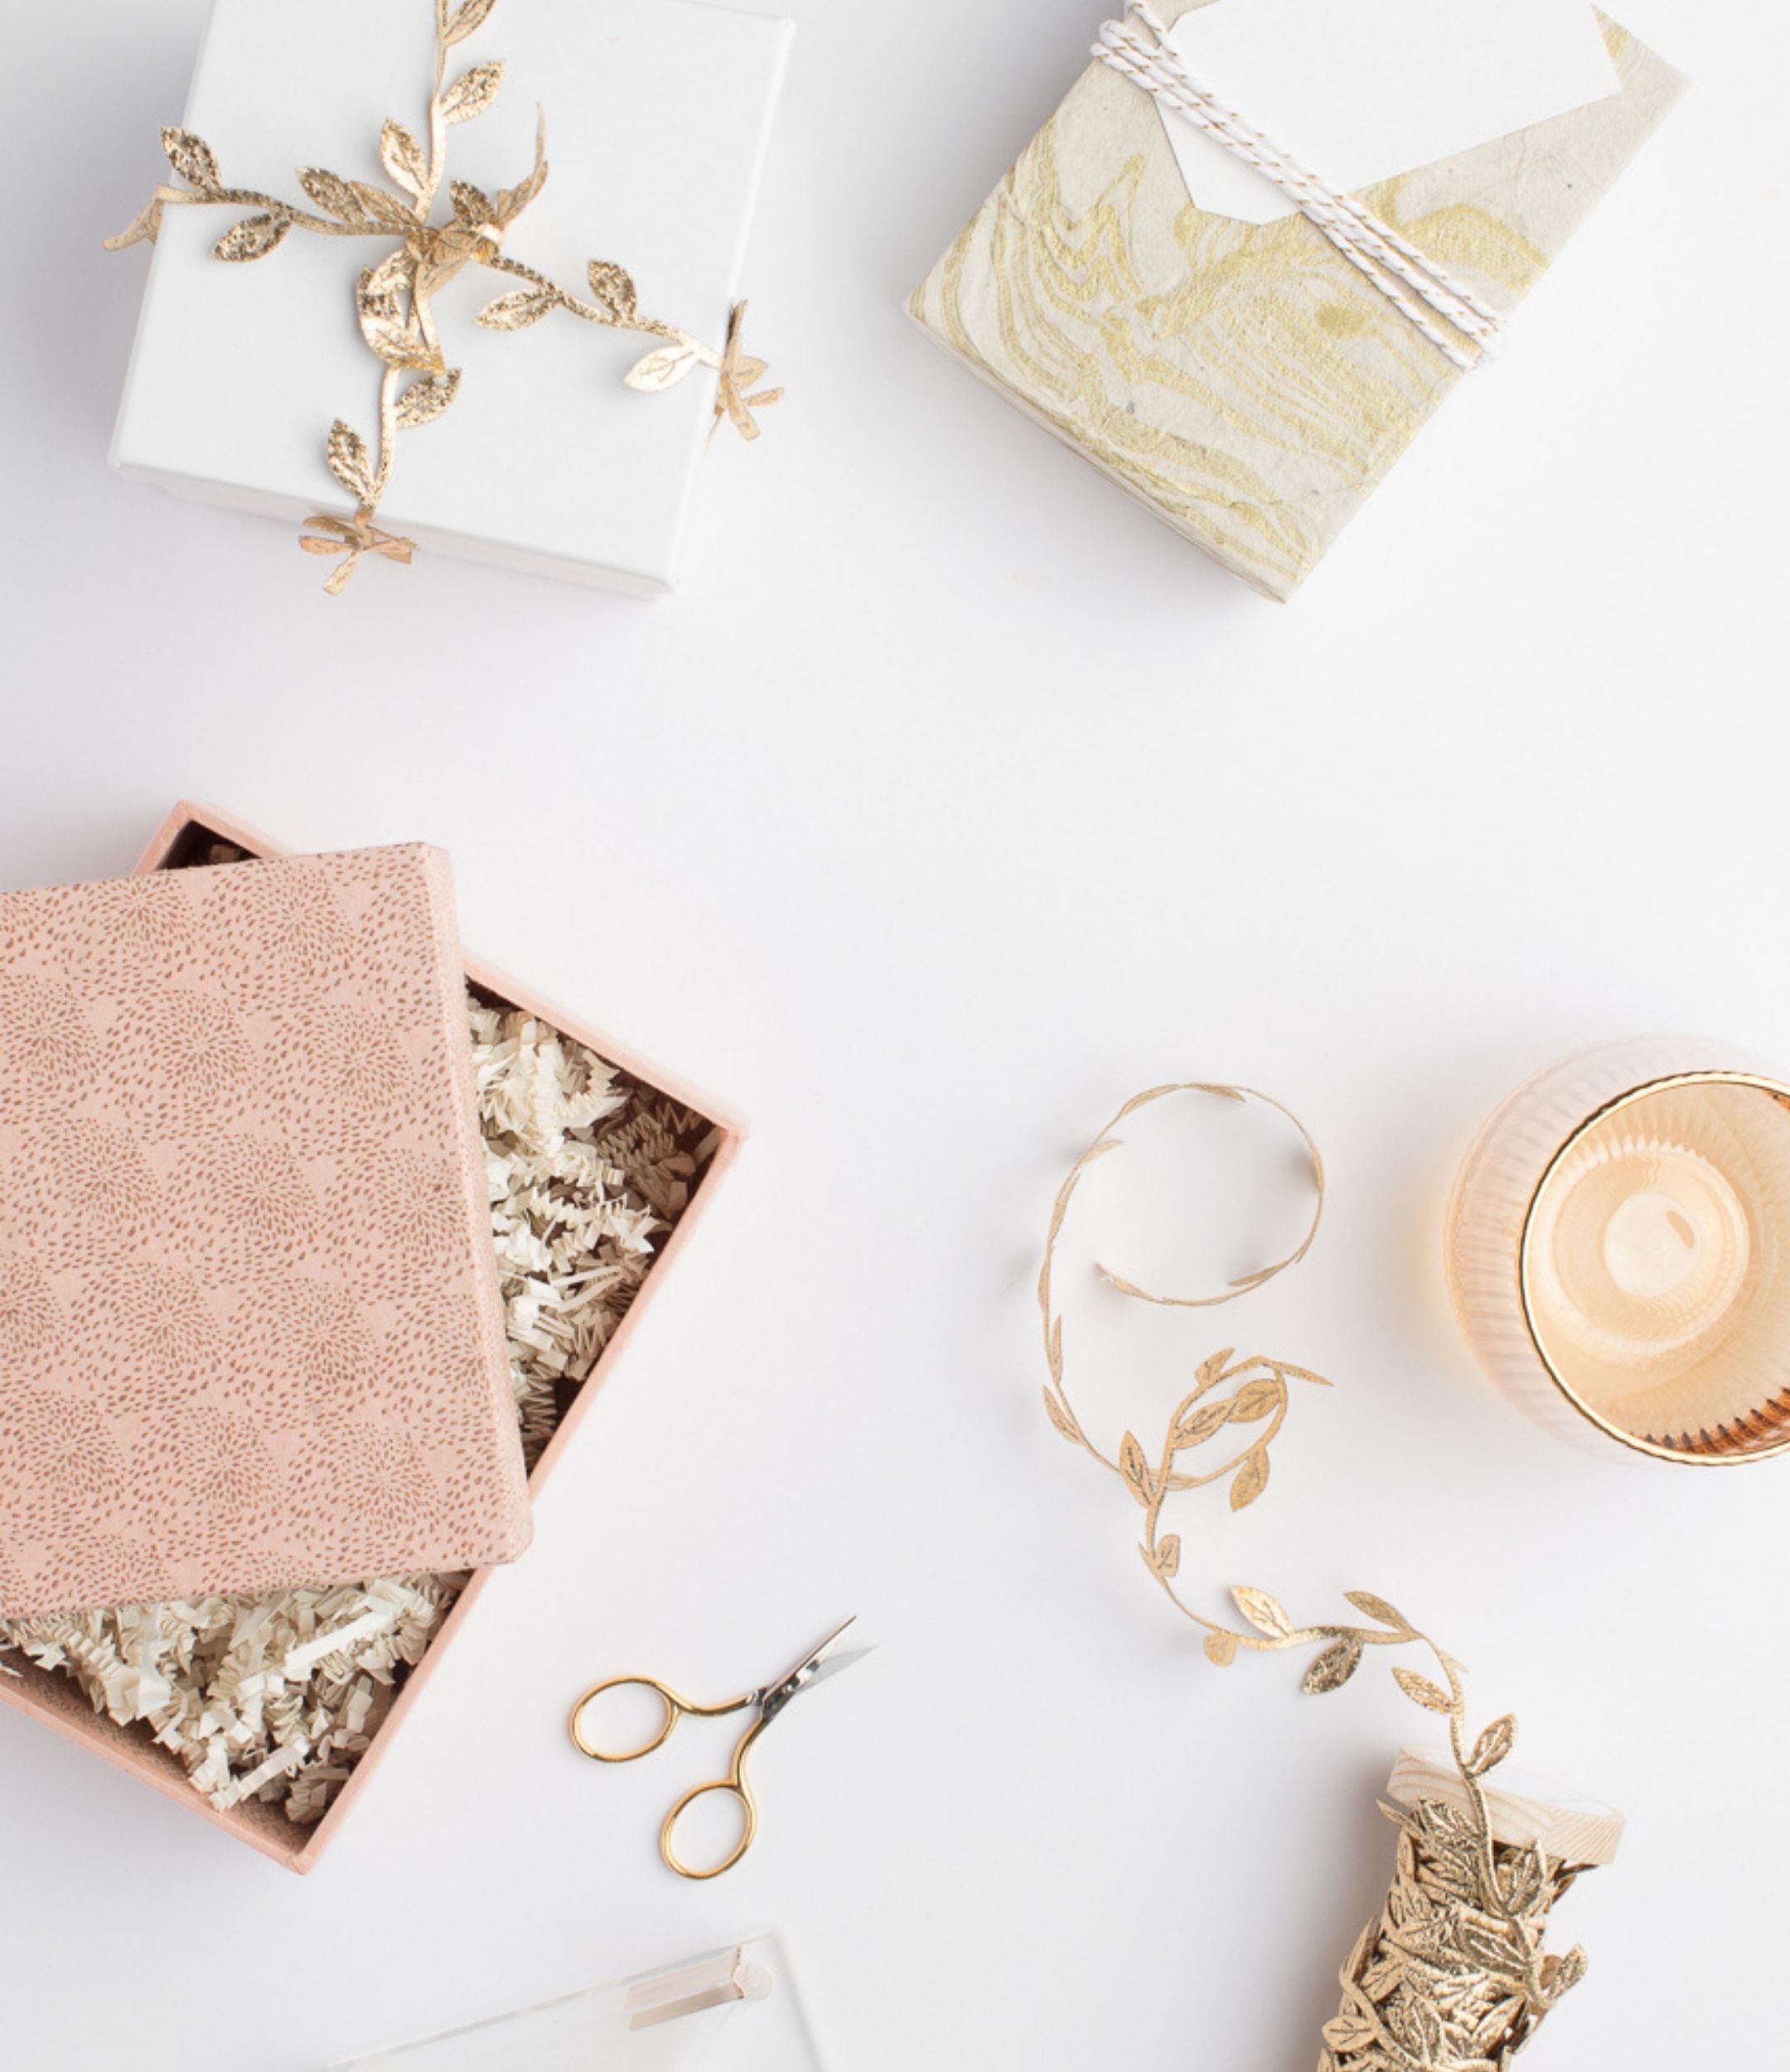 How to prepare your Etsy shop for successful holiday season